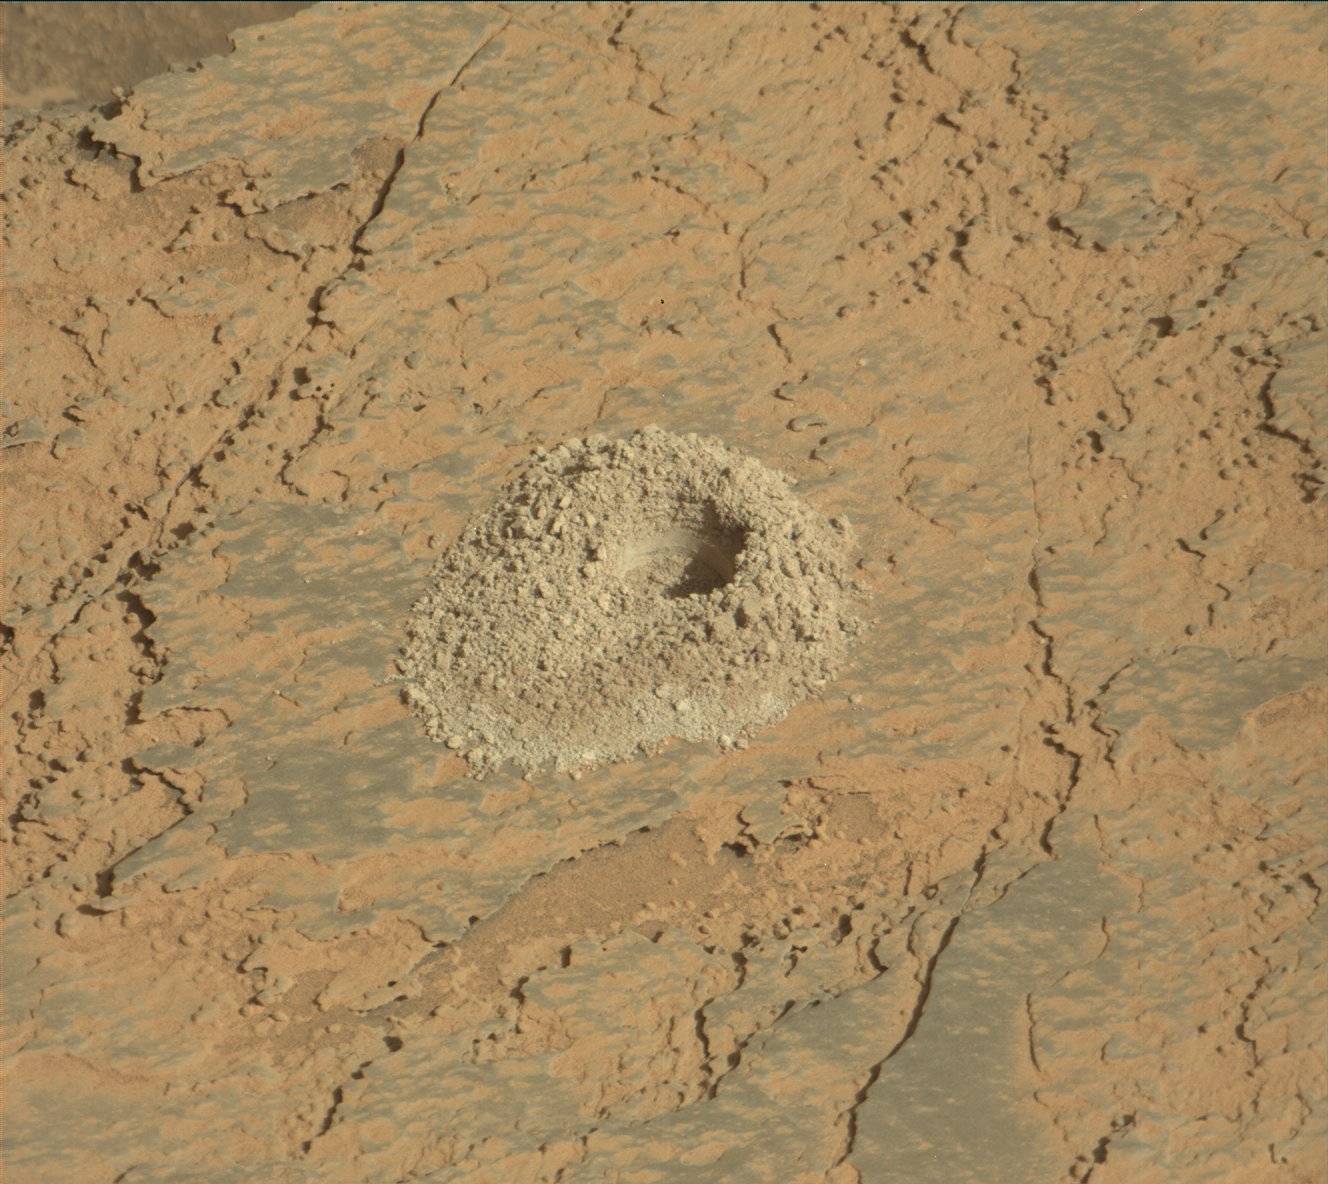 A hole in the surface of Mars created by the Curiosity rover